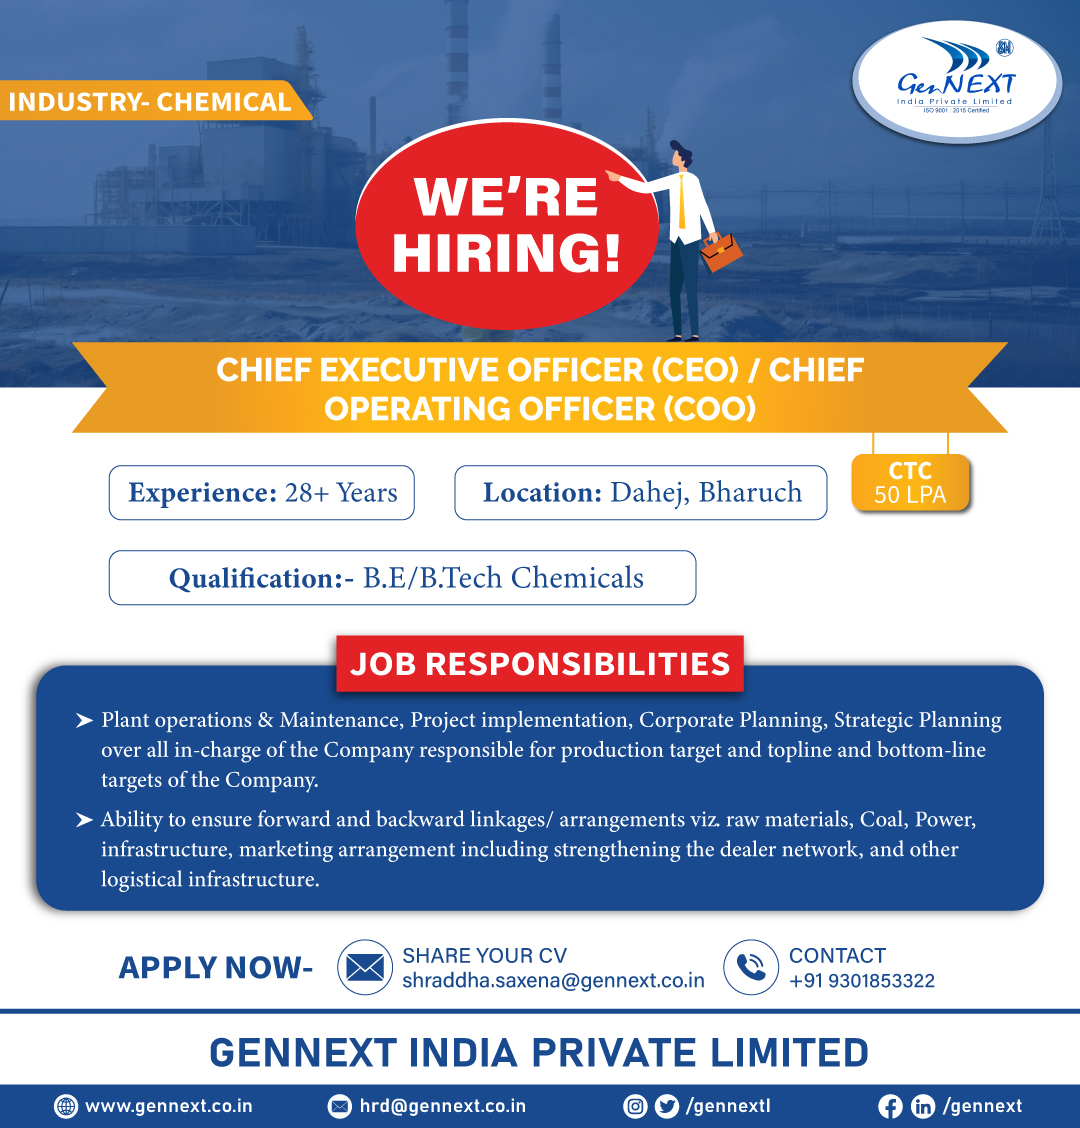 #UrgentHiring 💼📢🎯

Position: Chief Executive Officer (CEO)/ Chief Operating Officer (COO) 
Location: Dahej, Bharuch
CTC: 50 LPA

#ChiefExecutiveOfficer #ChiefOperatingOfficer #Tech #chemical #Bharuch #Dahej #Graduate #PostGraduate #gennextjob #gennexthiring #GenNext #hiring